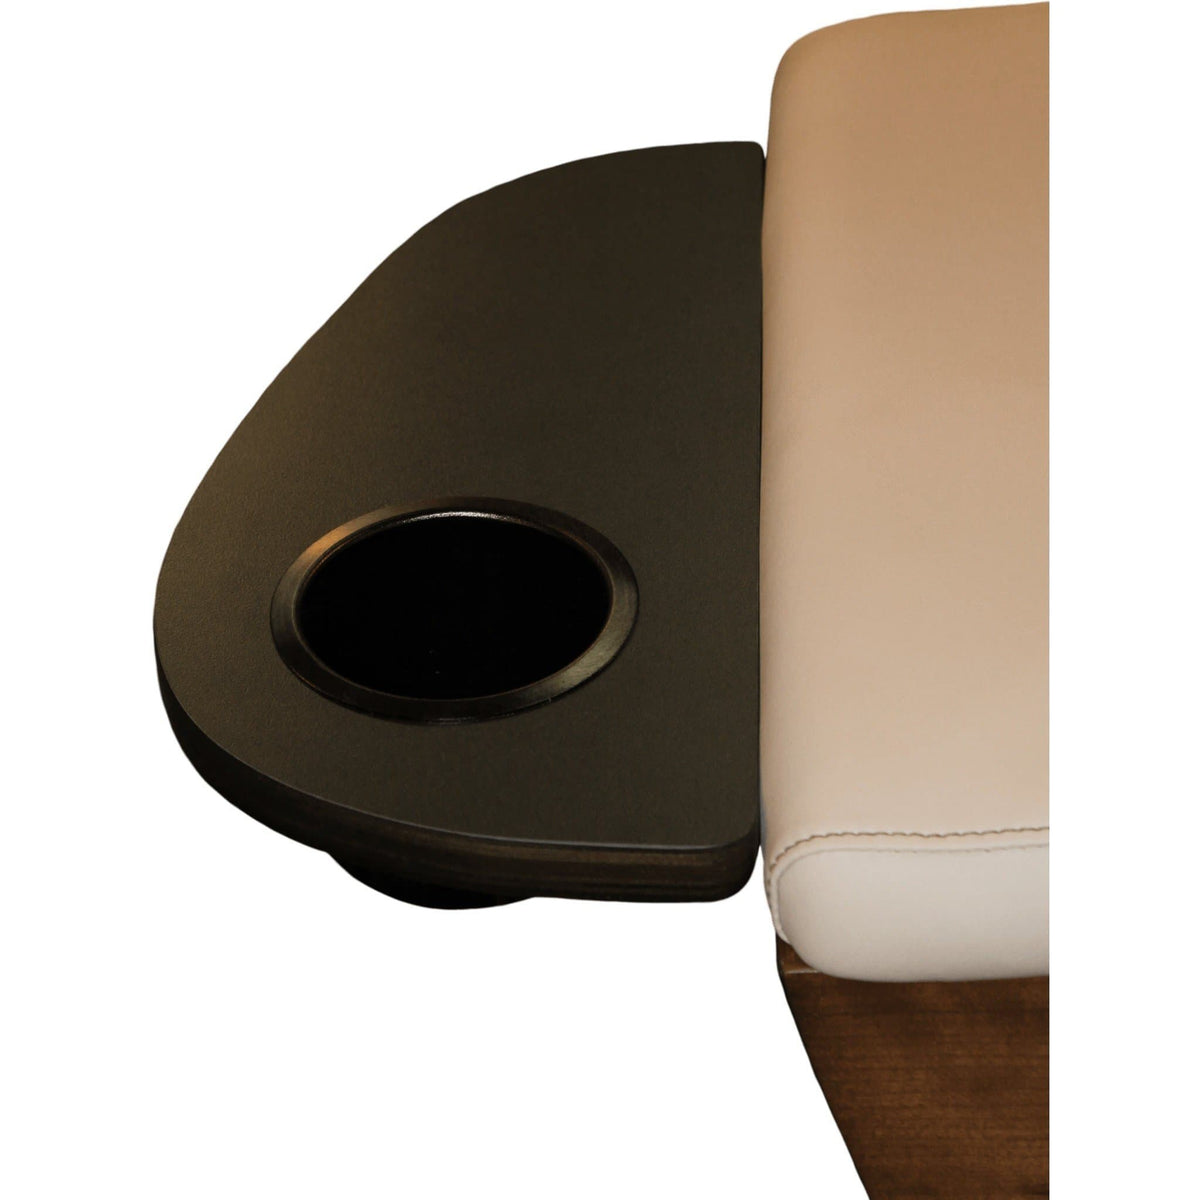 Continuum Continuum Maestro Pedicure Spa Chair Pedicure &amp; Spa Chairs - ChairsThatGive